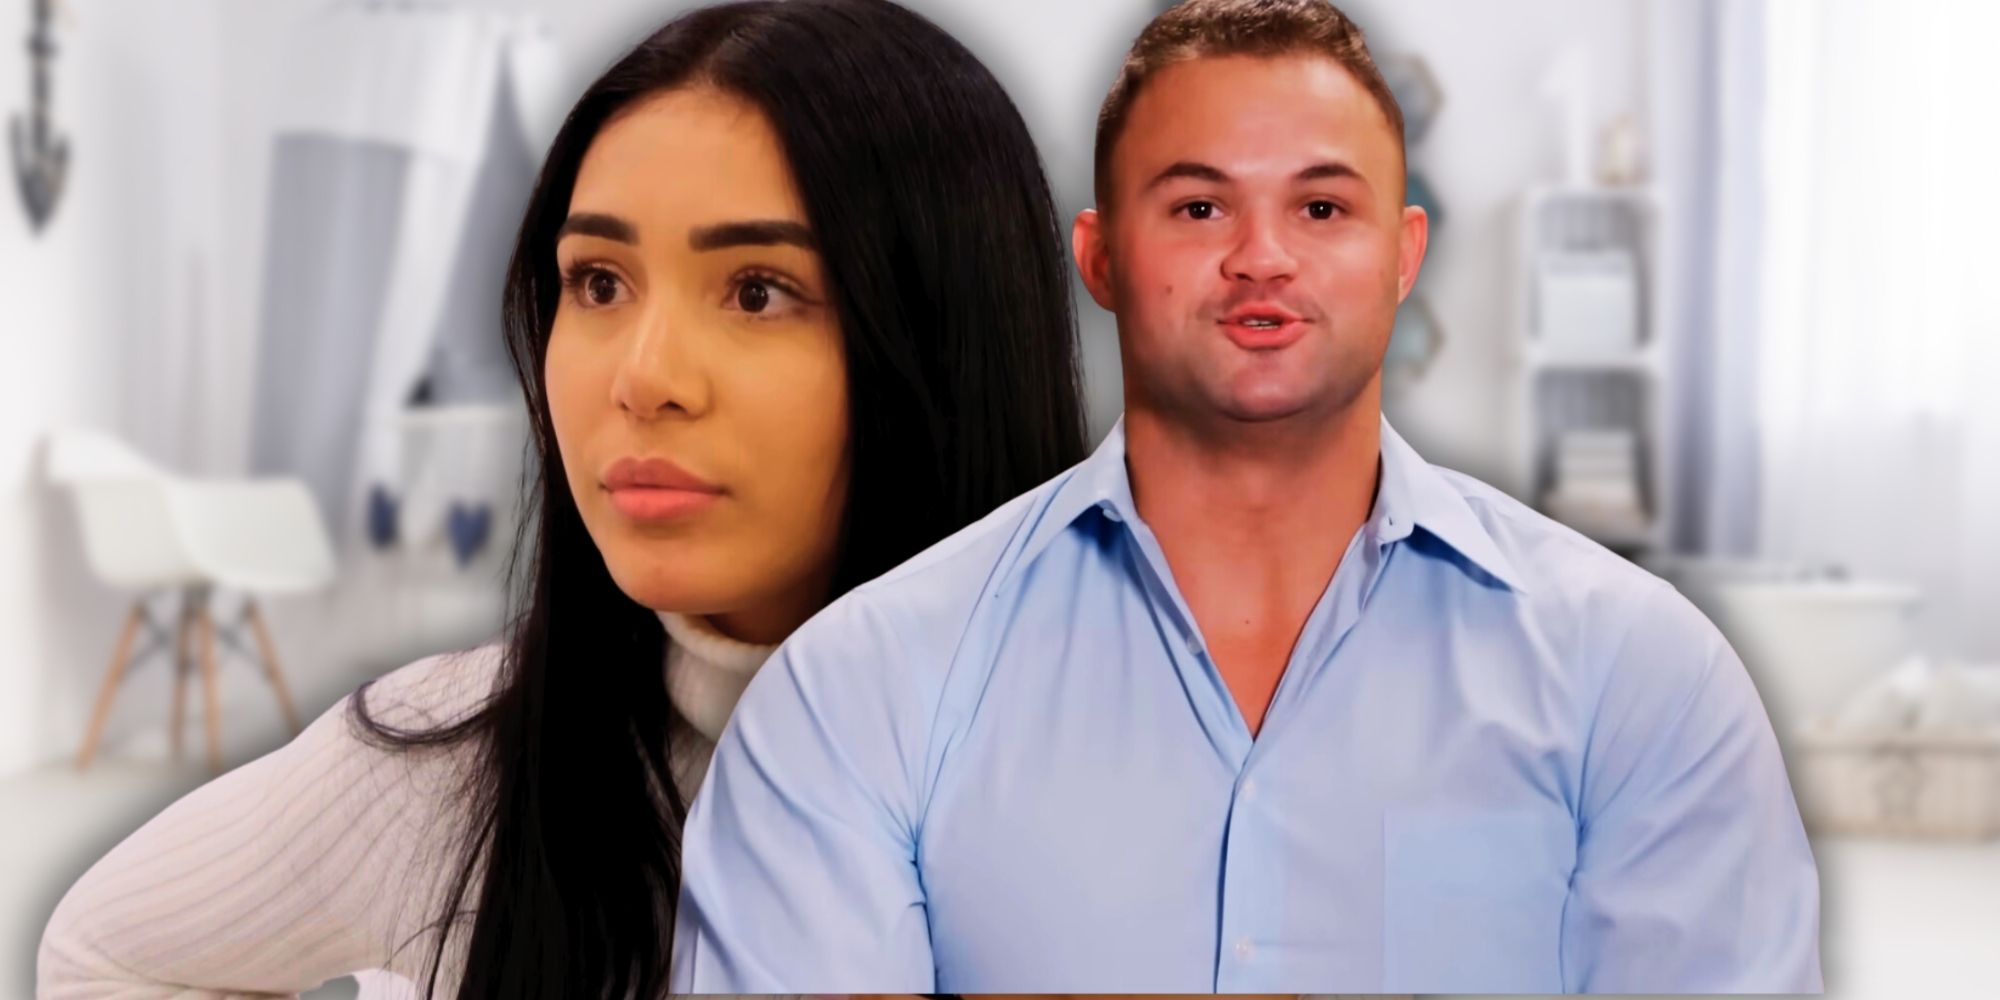 90 Day Fiancé’s Thaís Ramone & Patrick Mendes looking serious